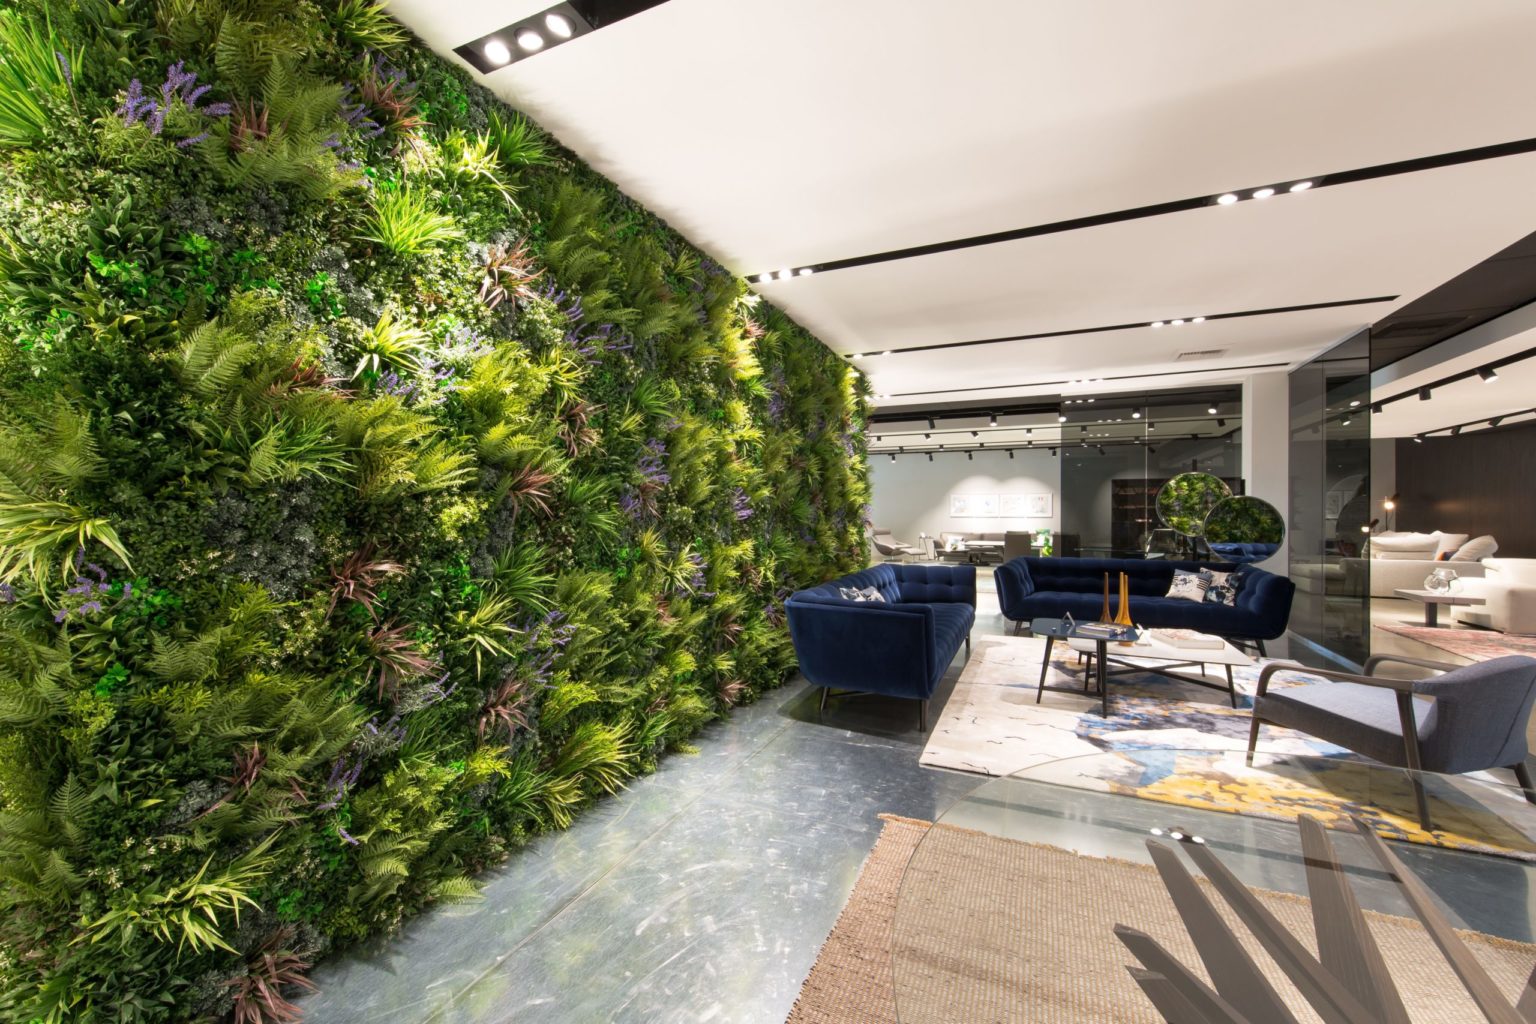 Office wall with artificial plant living wall panels